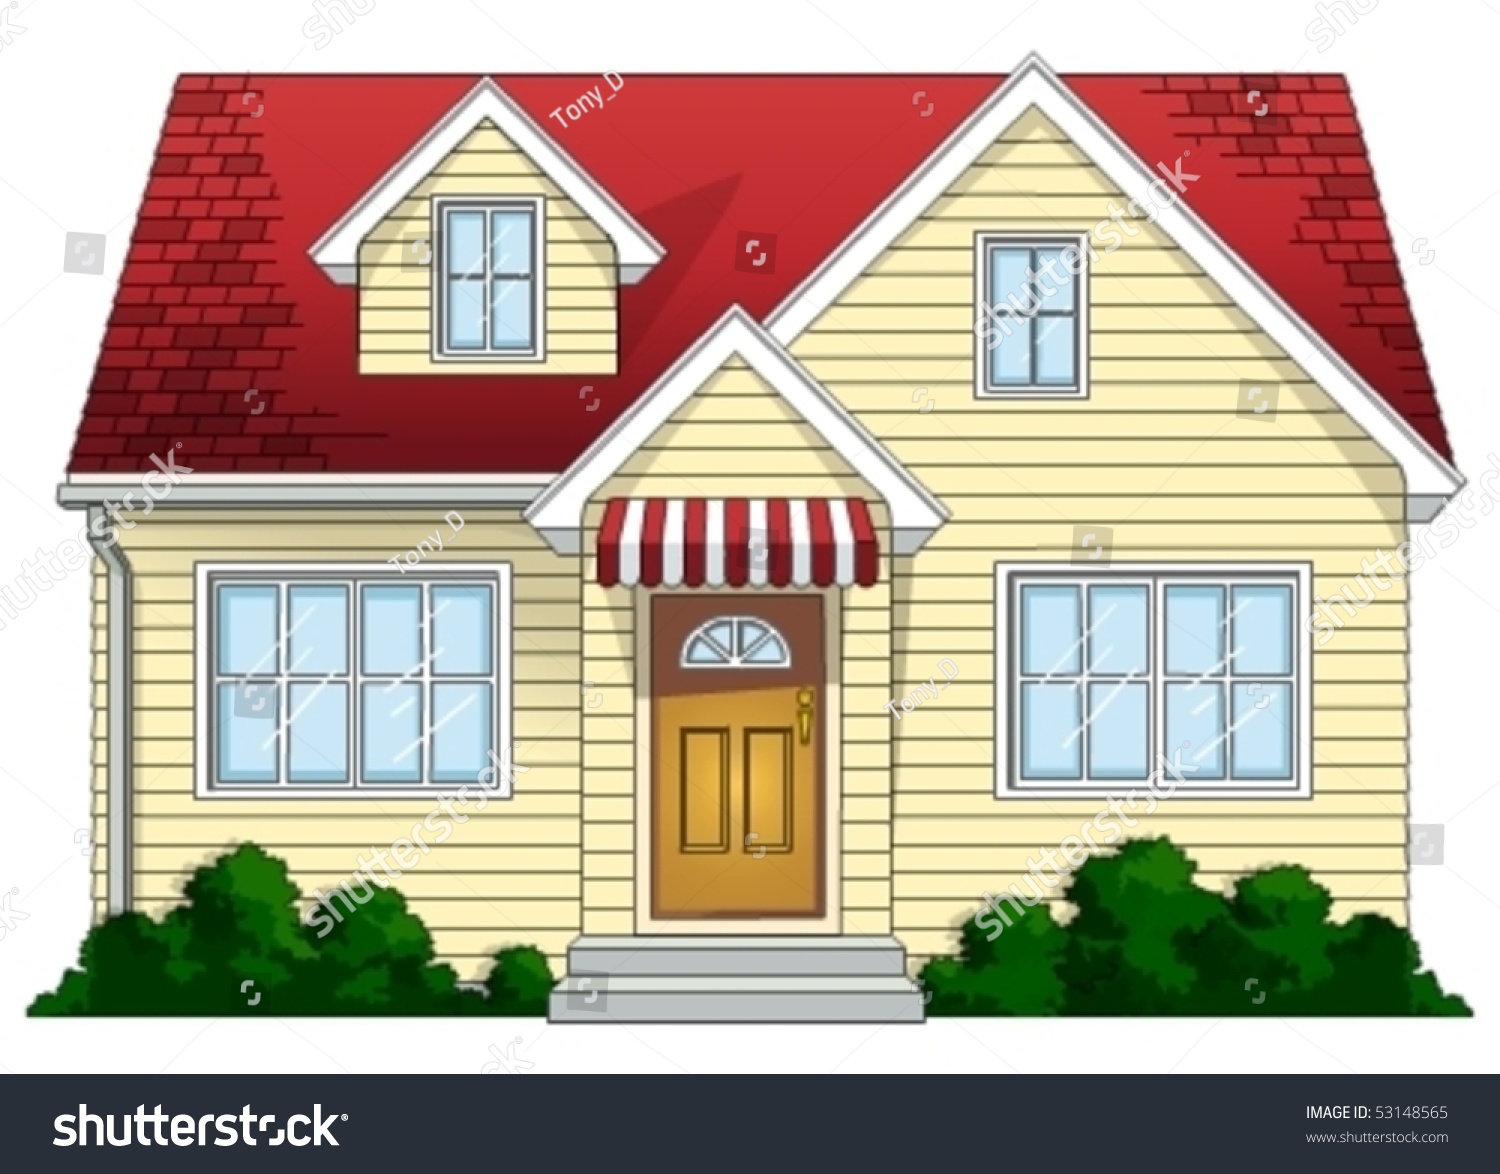 house with snow clipart - photo #39